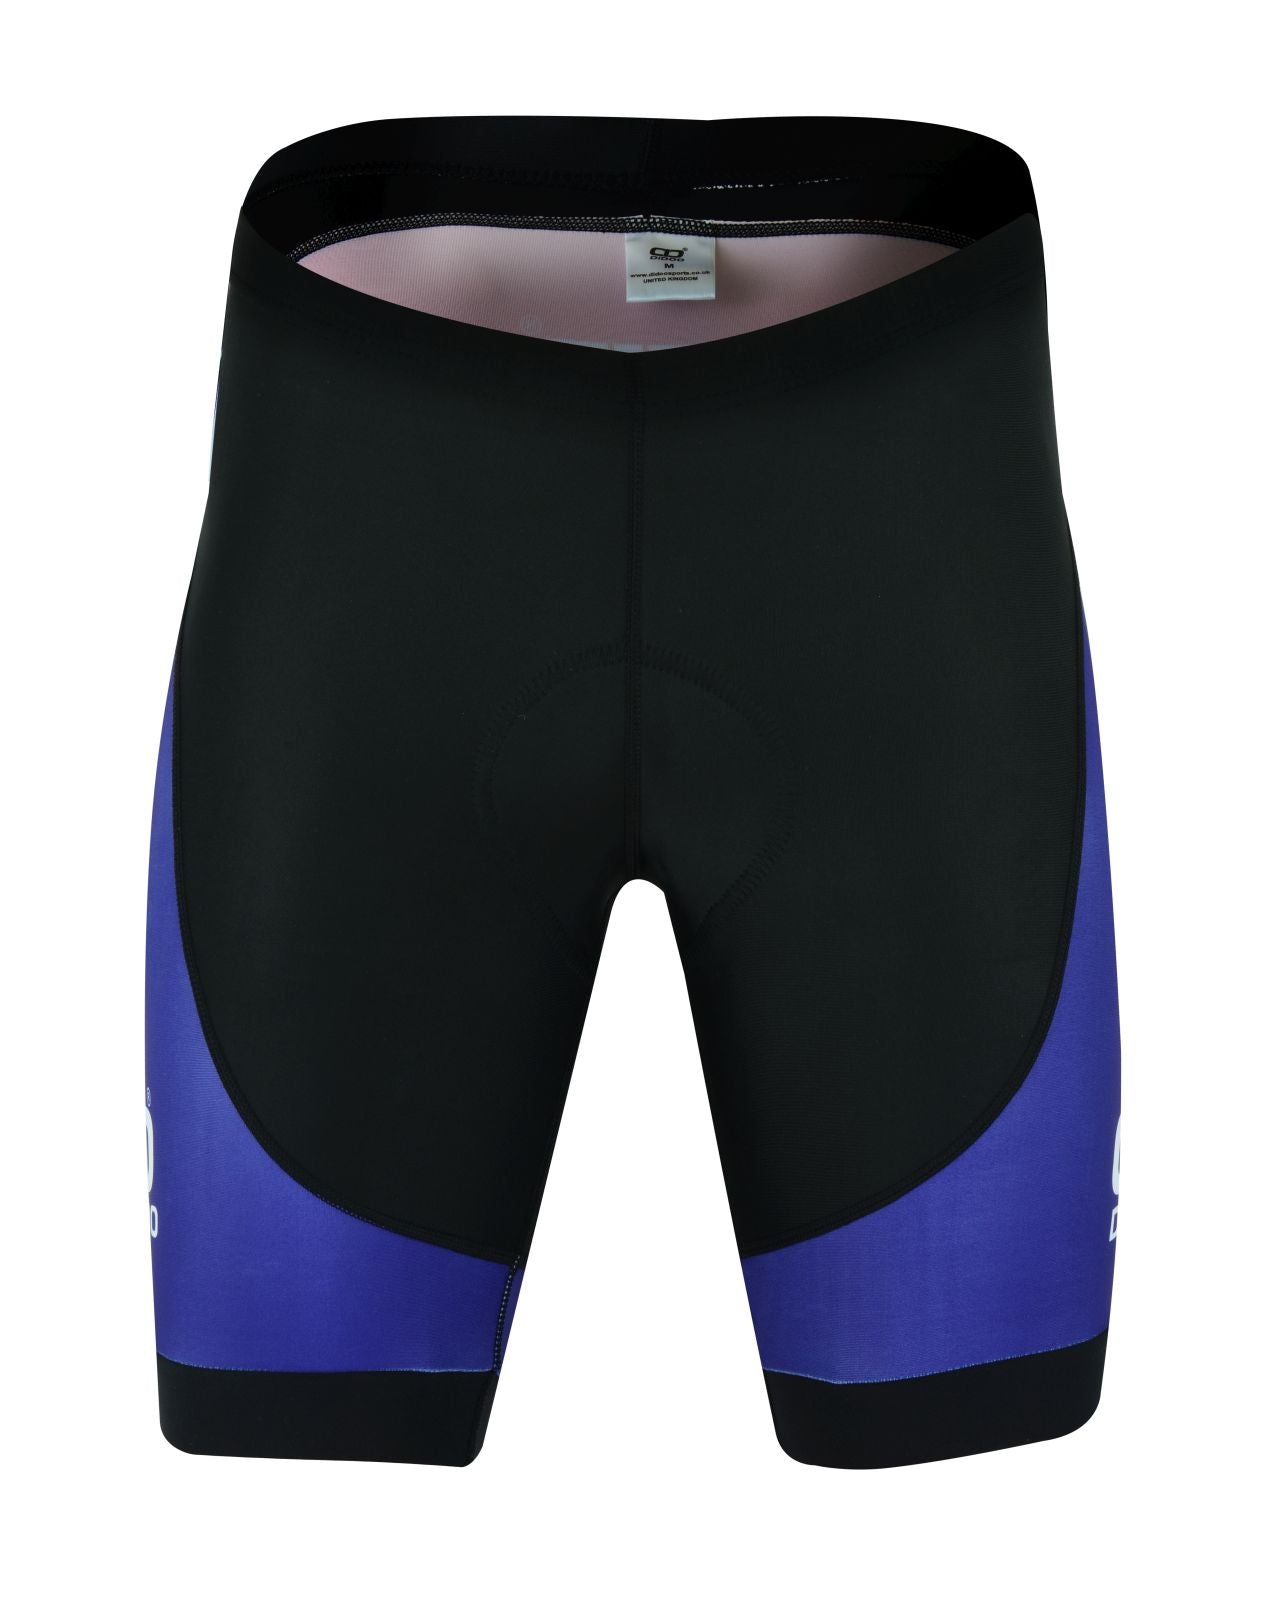 Men's Performance Cycling Shorts Blue and Red